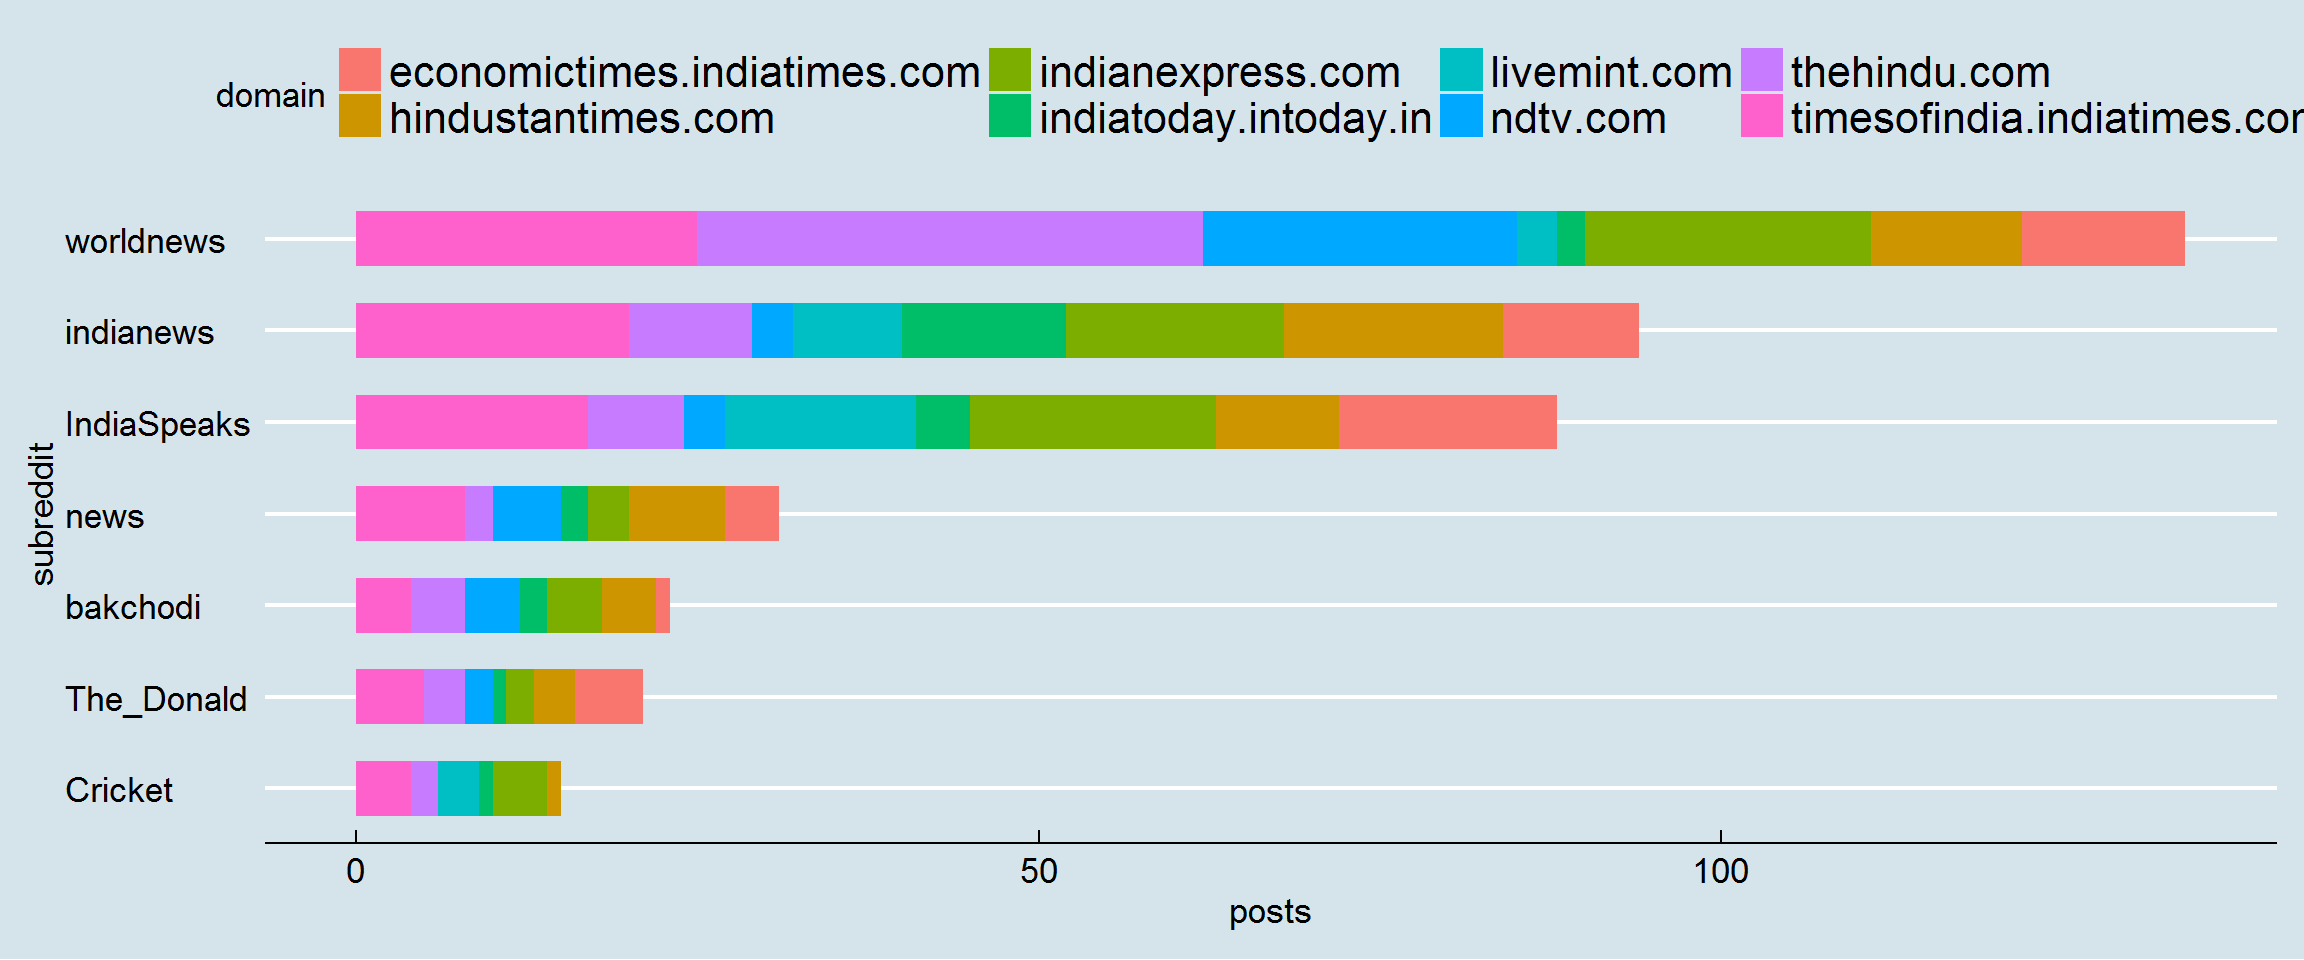   Posts with score > 10, Subreddits with >10 posts. Excl /r/india